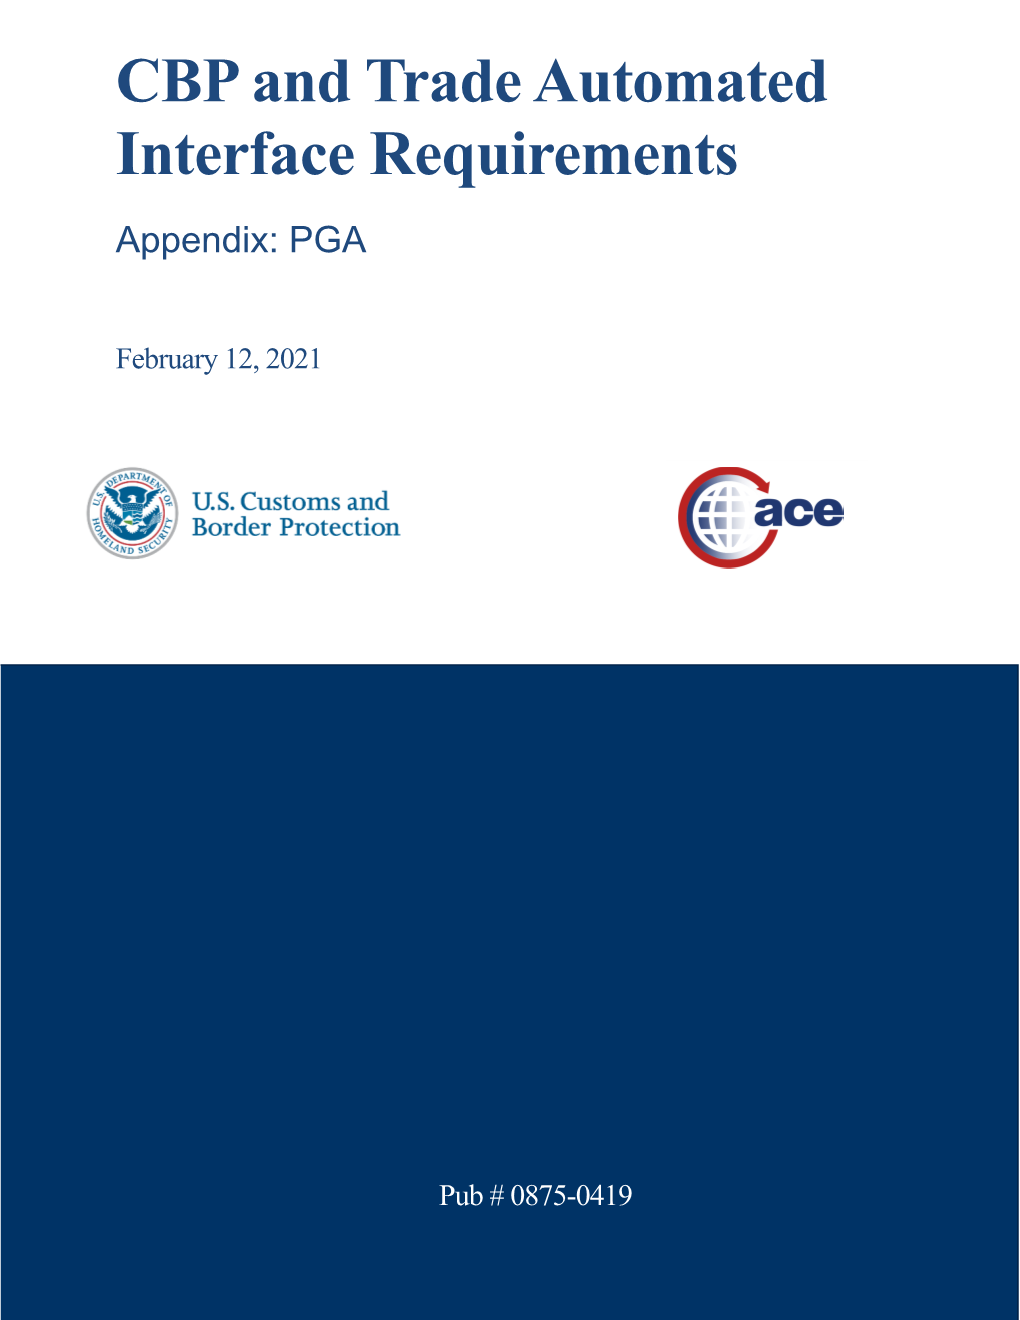 CBP and Trade Automated Interface Requirements Appendix: PGA